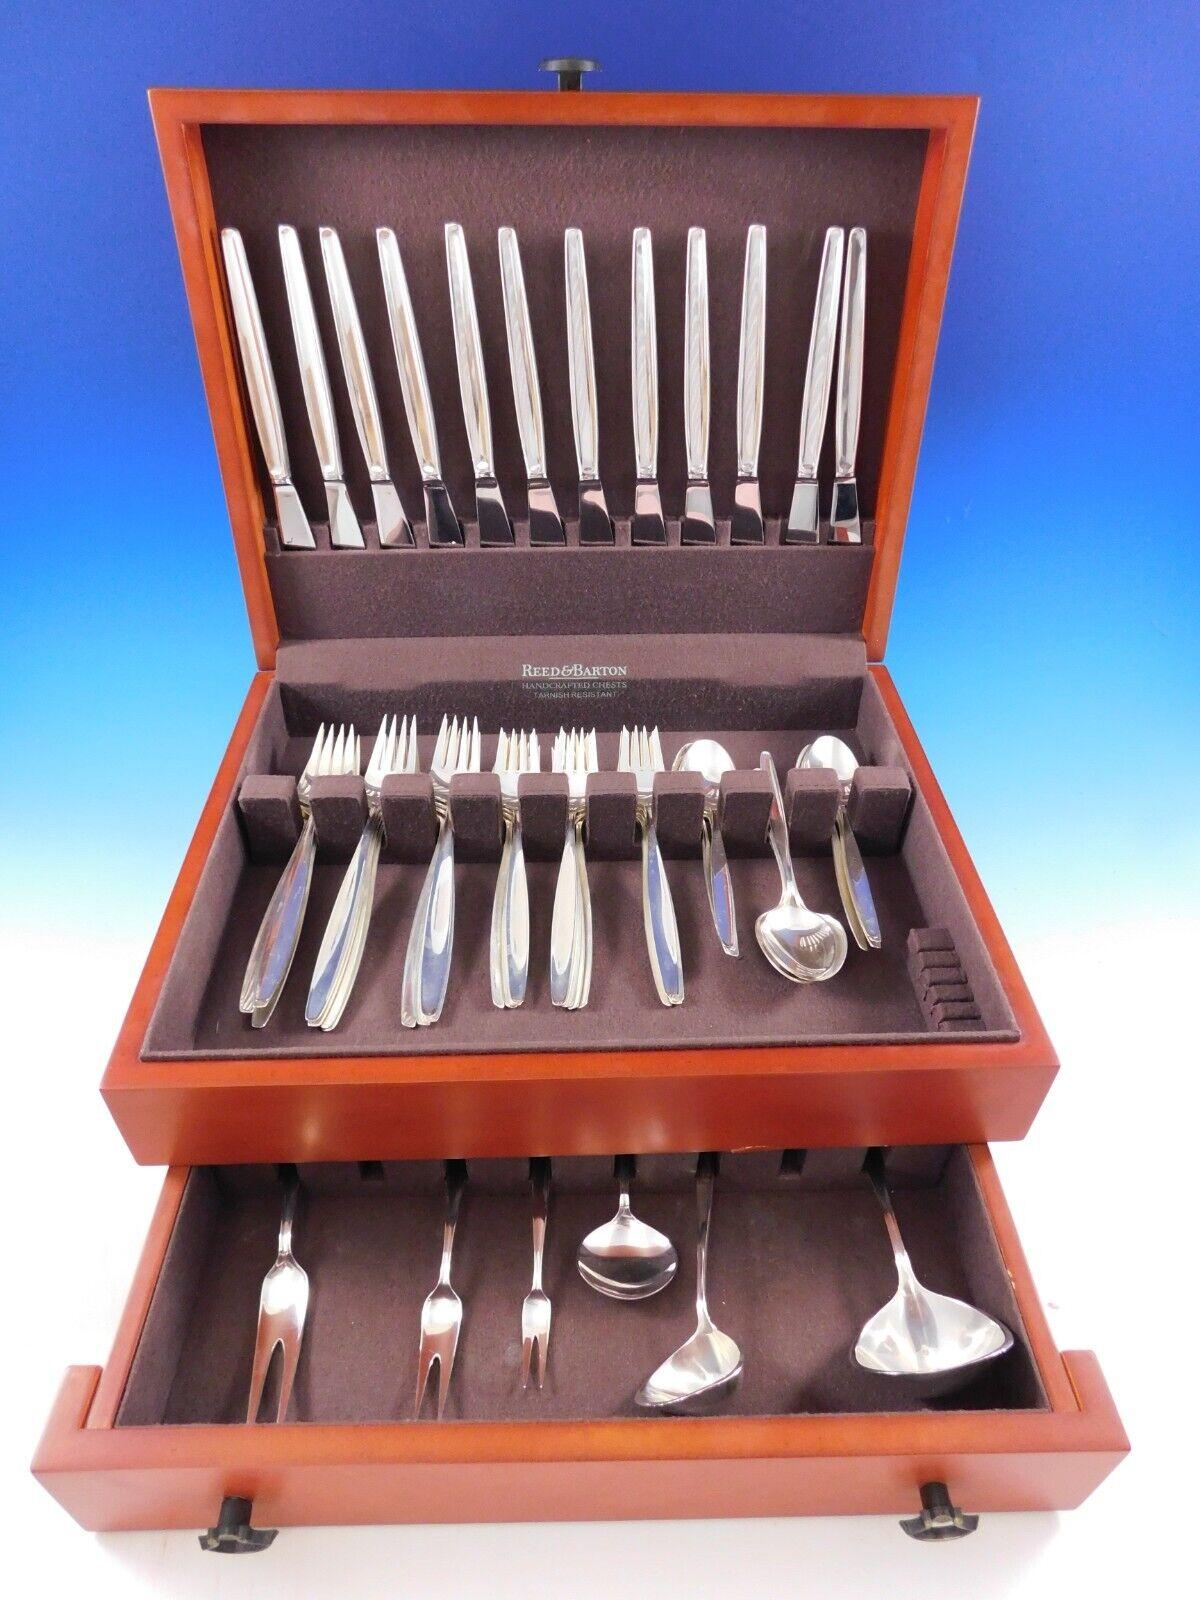 Mid-Century Modern cypress by Georg Jensen sterling silver flatware set, 77 pieces. This set includes:

12 dinner size knives, long handle, 8 7/8